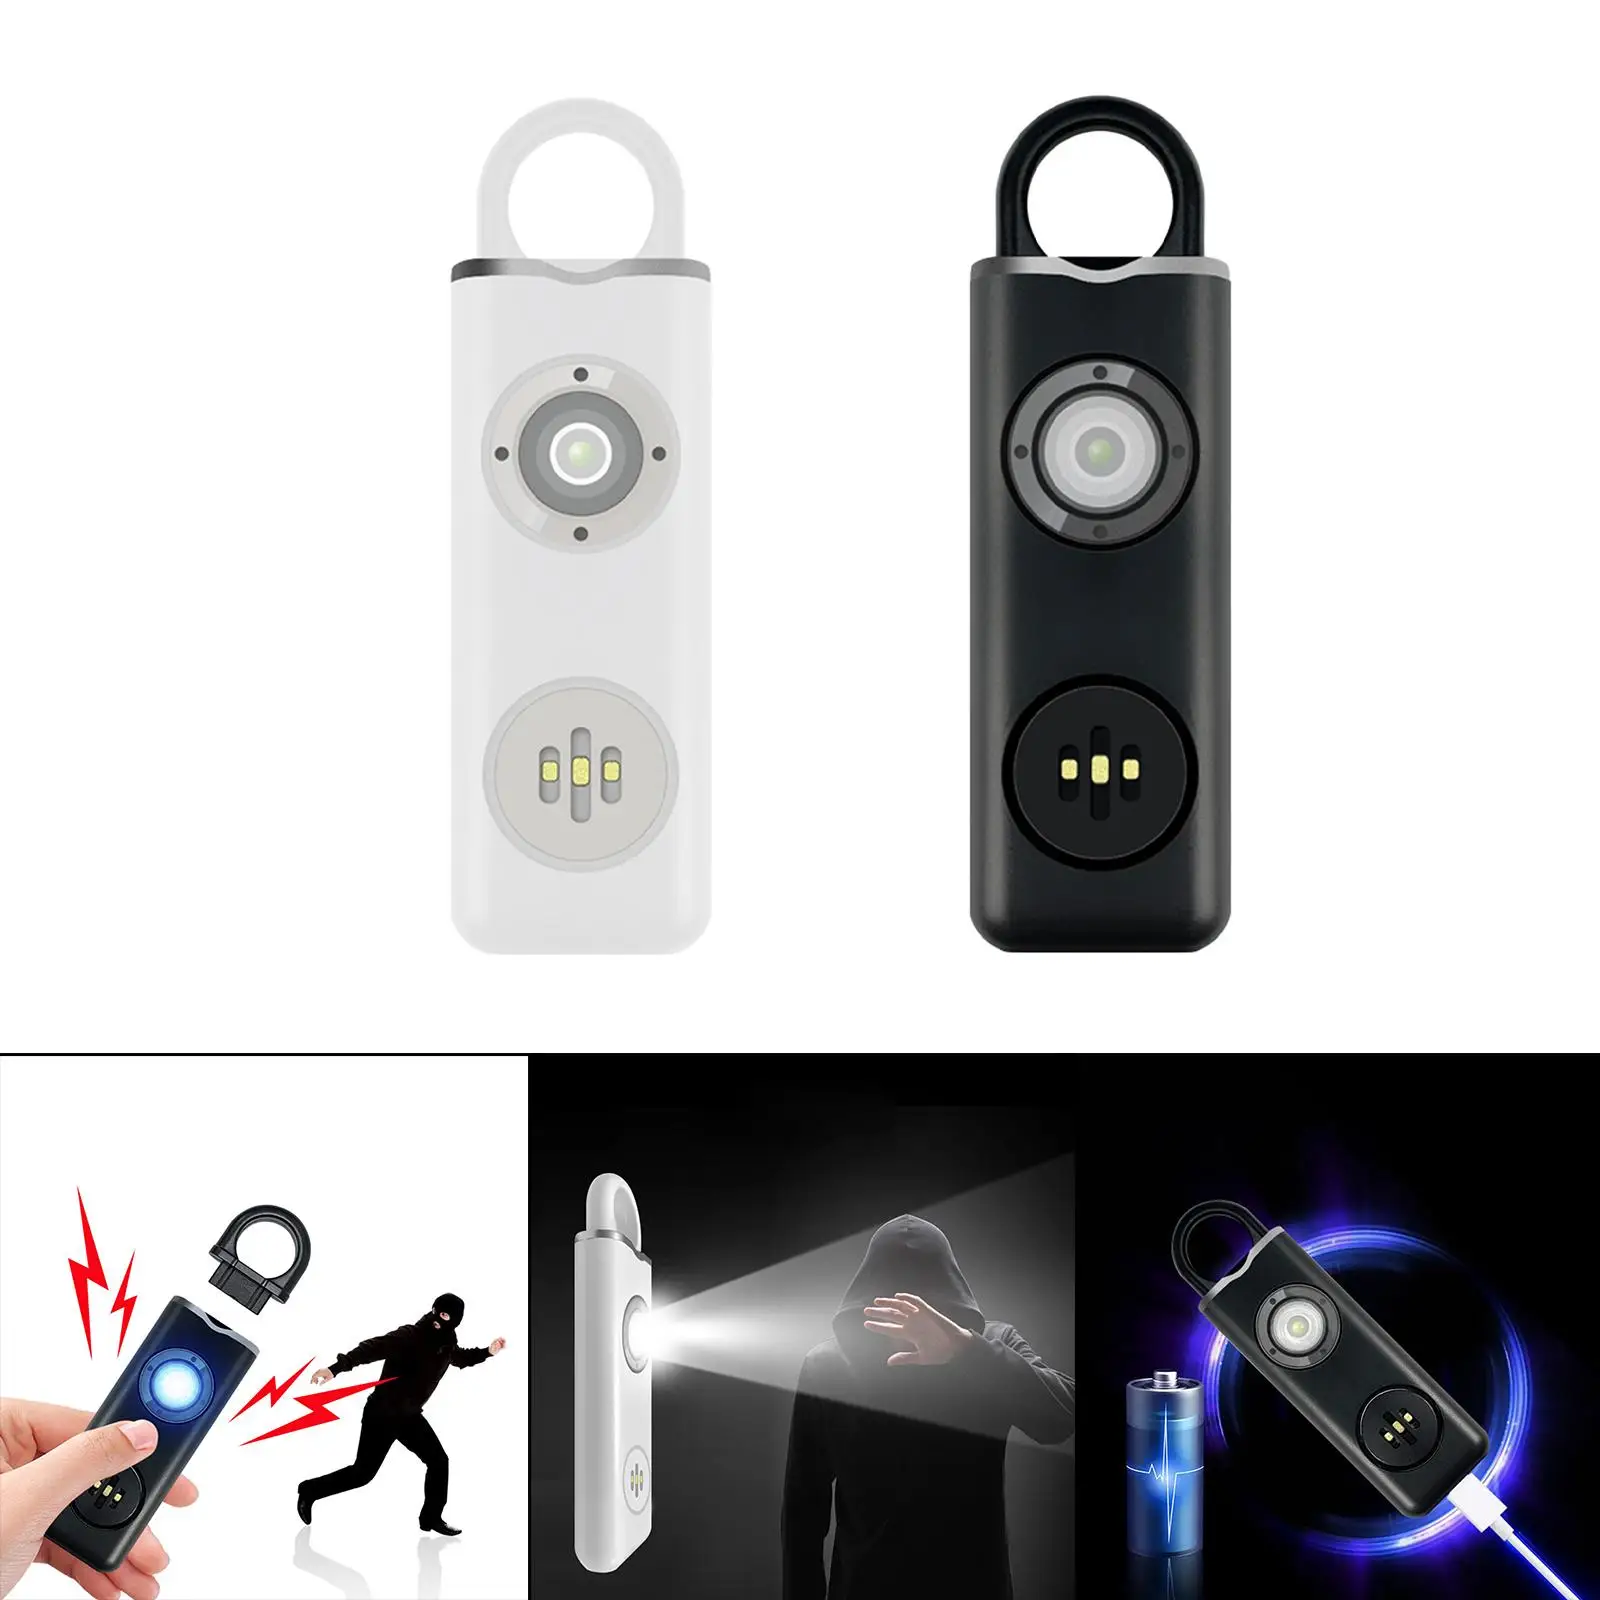 130dB Personal Alarm with LED Flashlight Strobe light Size Security Personal Protection Devices for Kids Women Girls